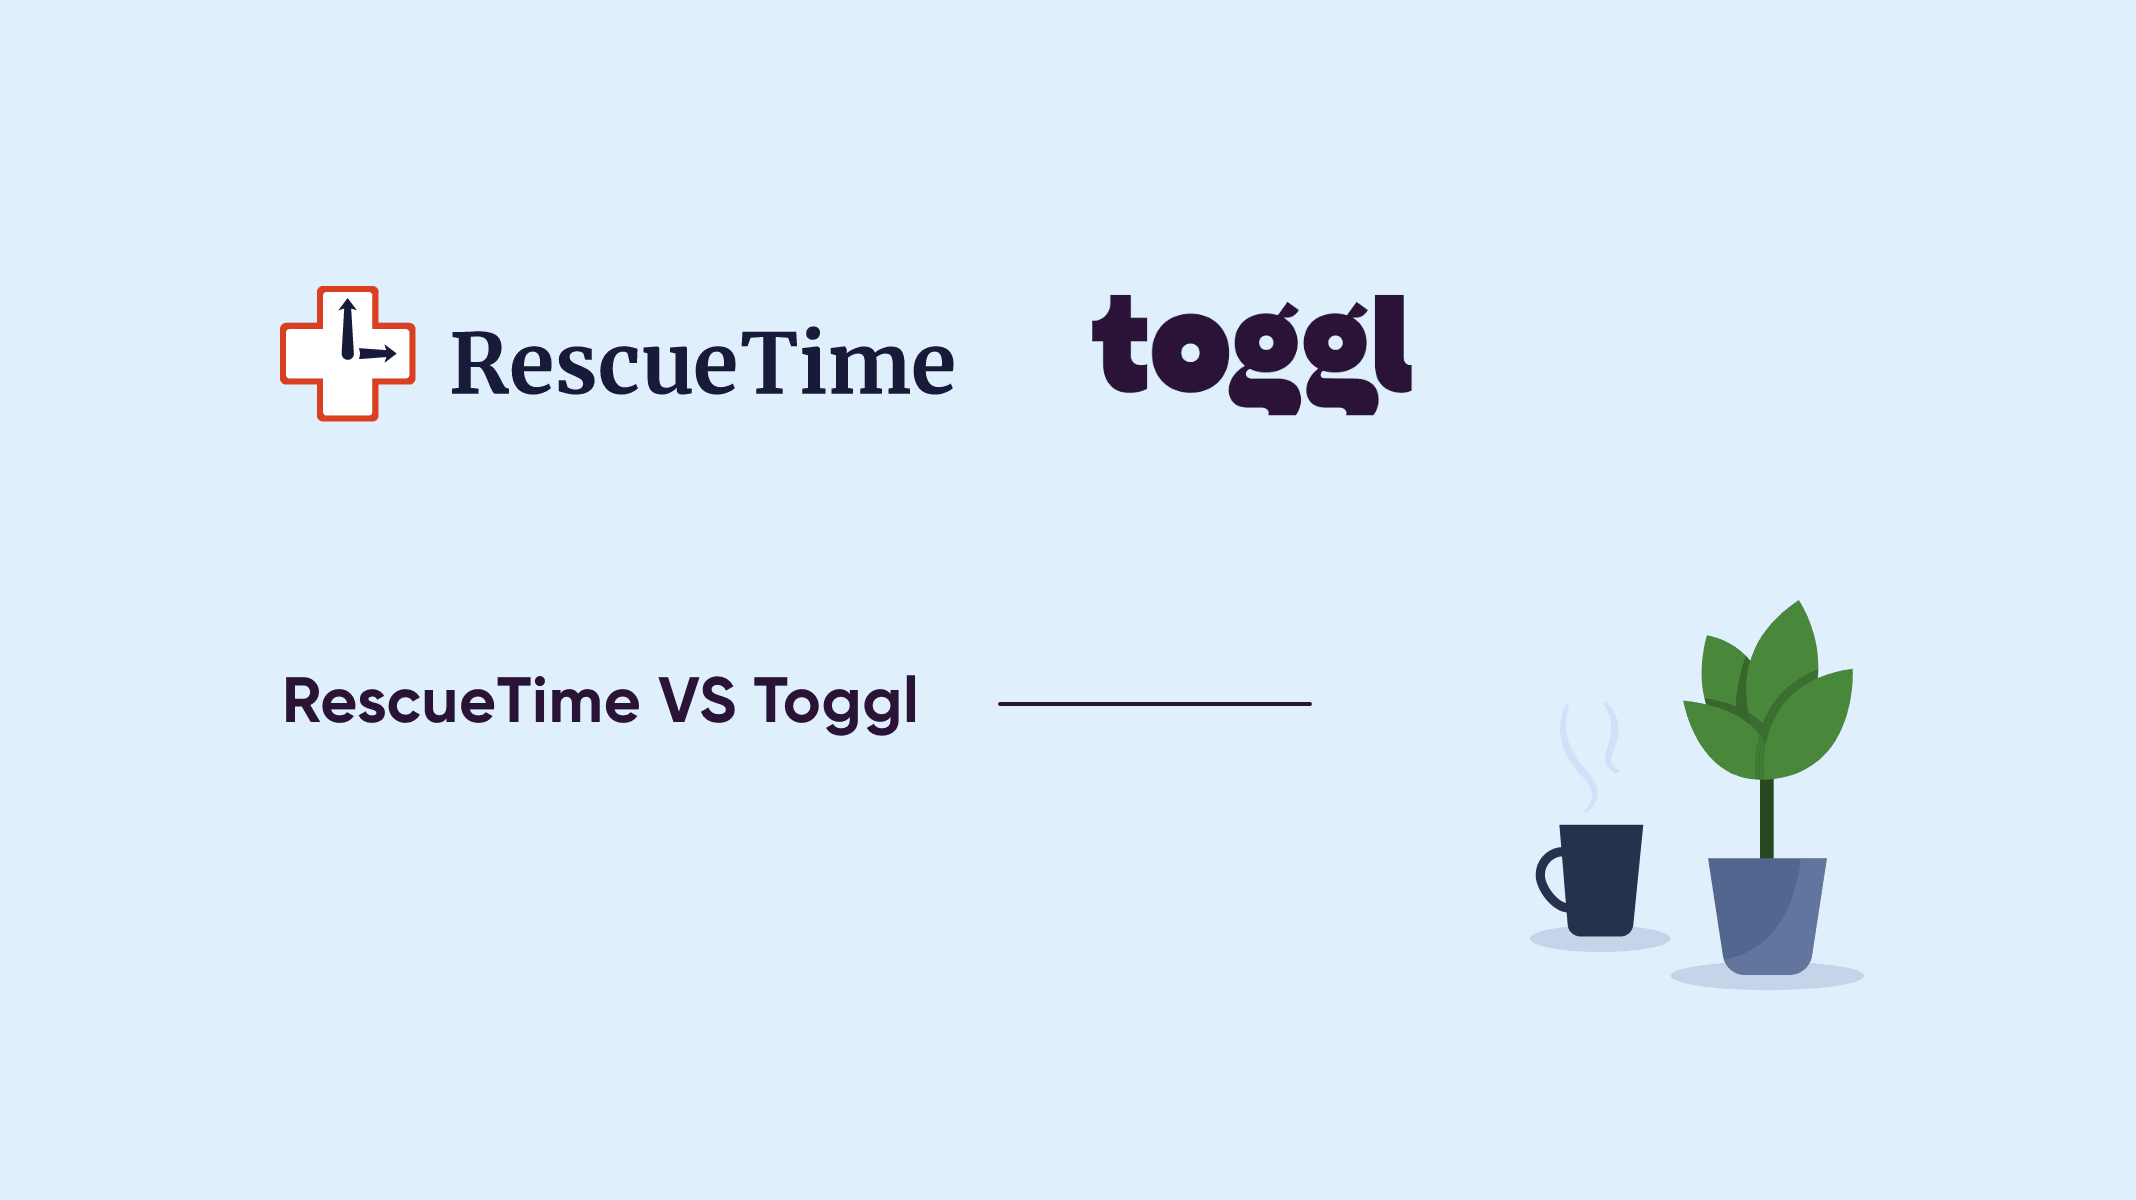 RescueTime and toggl logos are being shown, and writing show RescueTime vs Toggl, alongside a tree and coffee